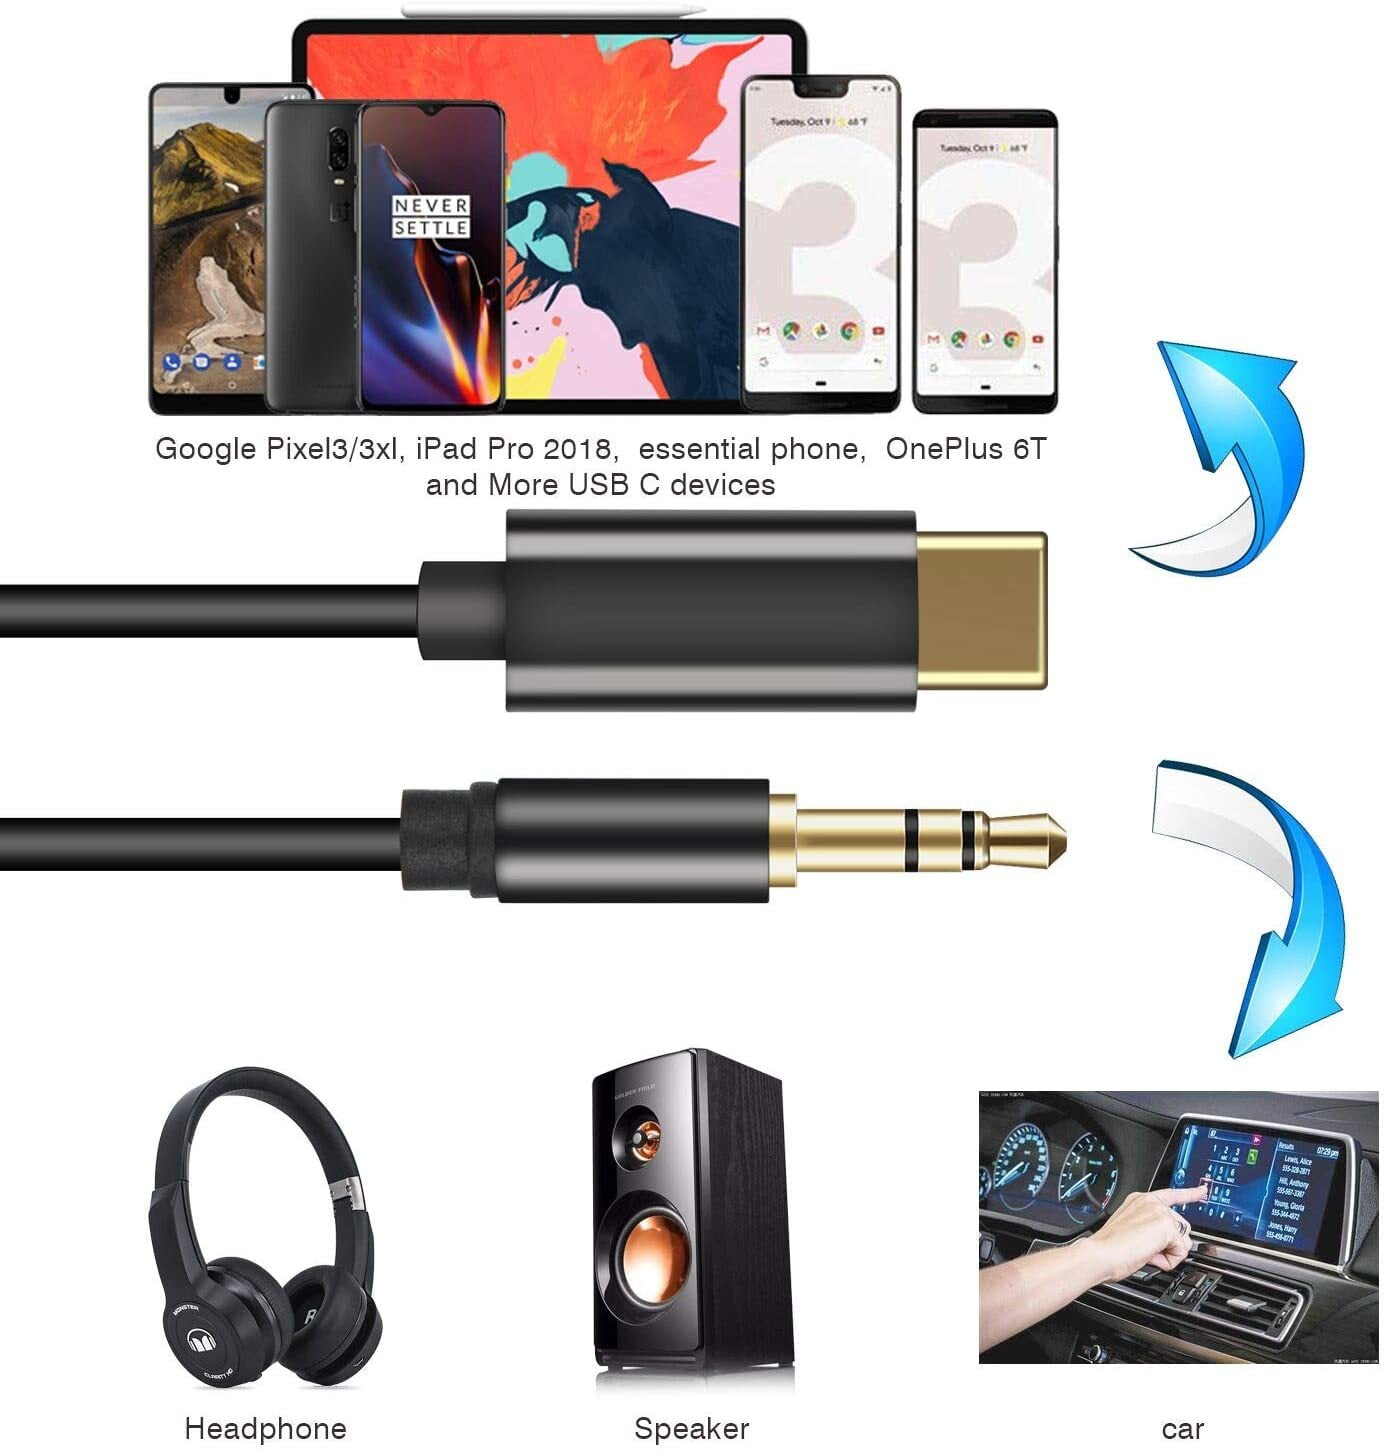 Galaxy Note 10/10+/S20/S20+/S20 Ultra/Note 20/ Note 20 Ultra OnePlus 6T/7/7Pro/7T/8/8Pro Moto Type C to 3.5mm Aux Cord for Google Pixel 4/4XL/3/3 XL/2/2XL USB C to 3.5mm Aux Cable 4FT 